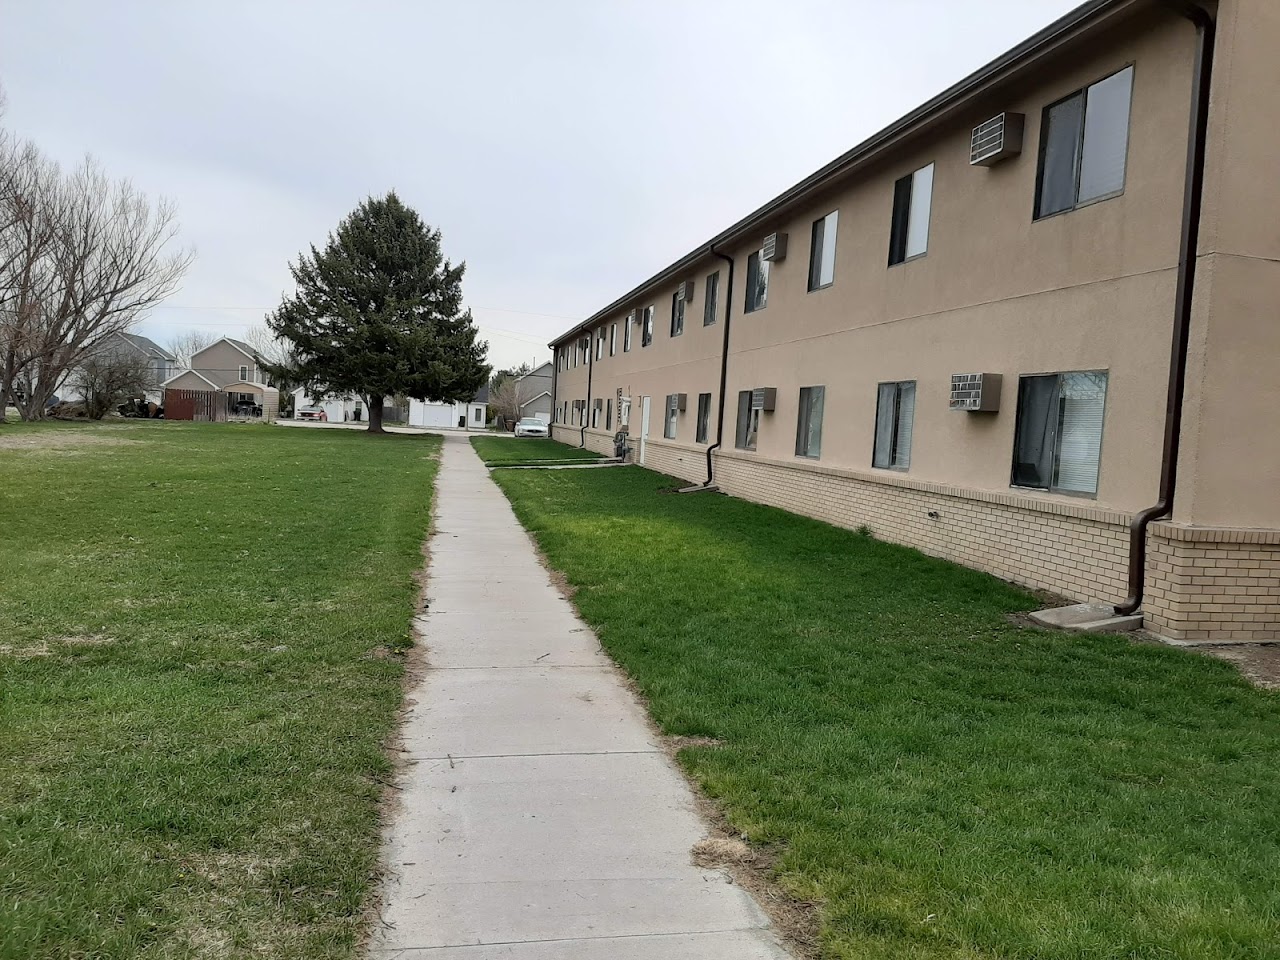 Photo of WEST WING APTS. Affordable housing located at 1802 1/2 17TH AVE SCOTTSBLUFF, NE 69361